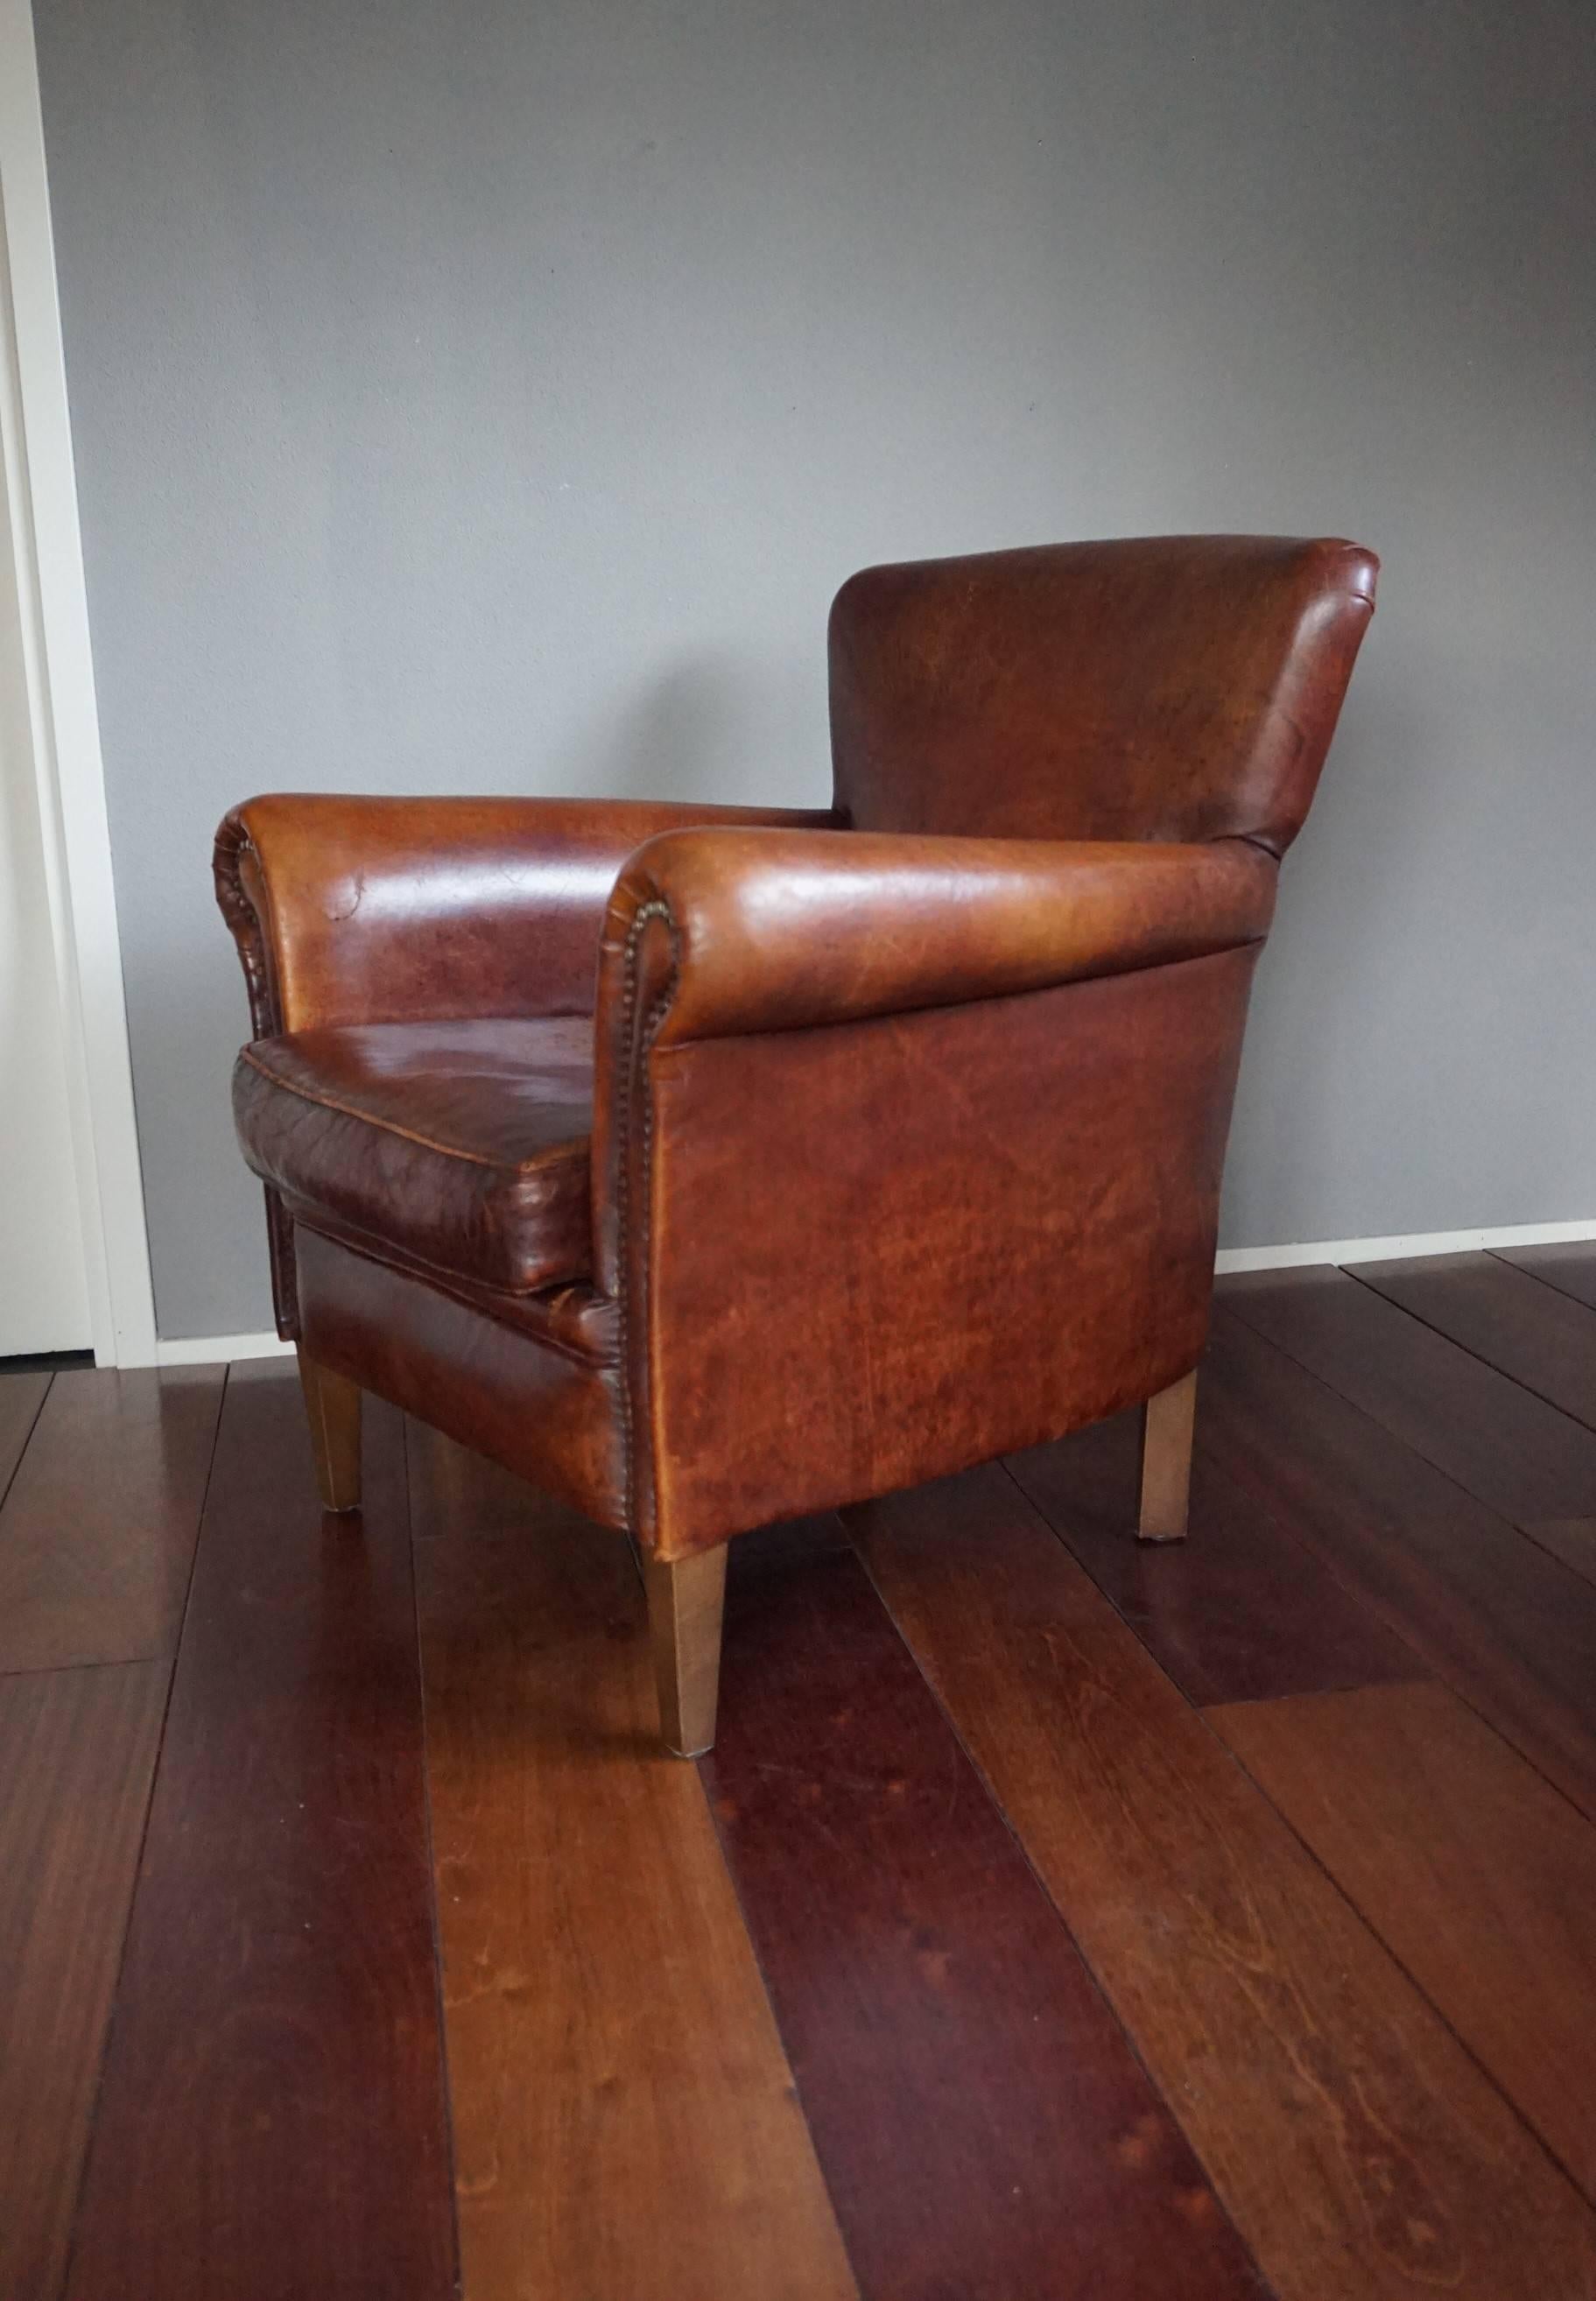 Dutch Great Quality and Condition Sheep Leather & Wood Chair Armchair with Warm Patina